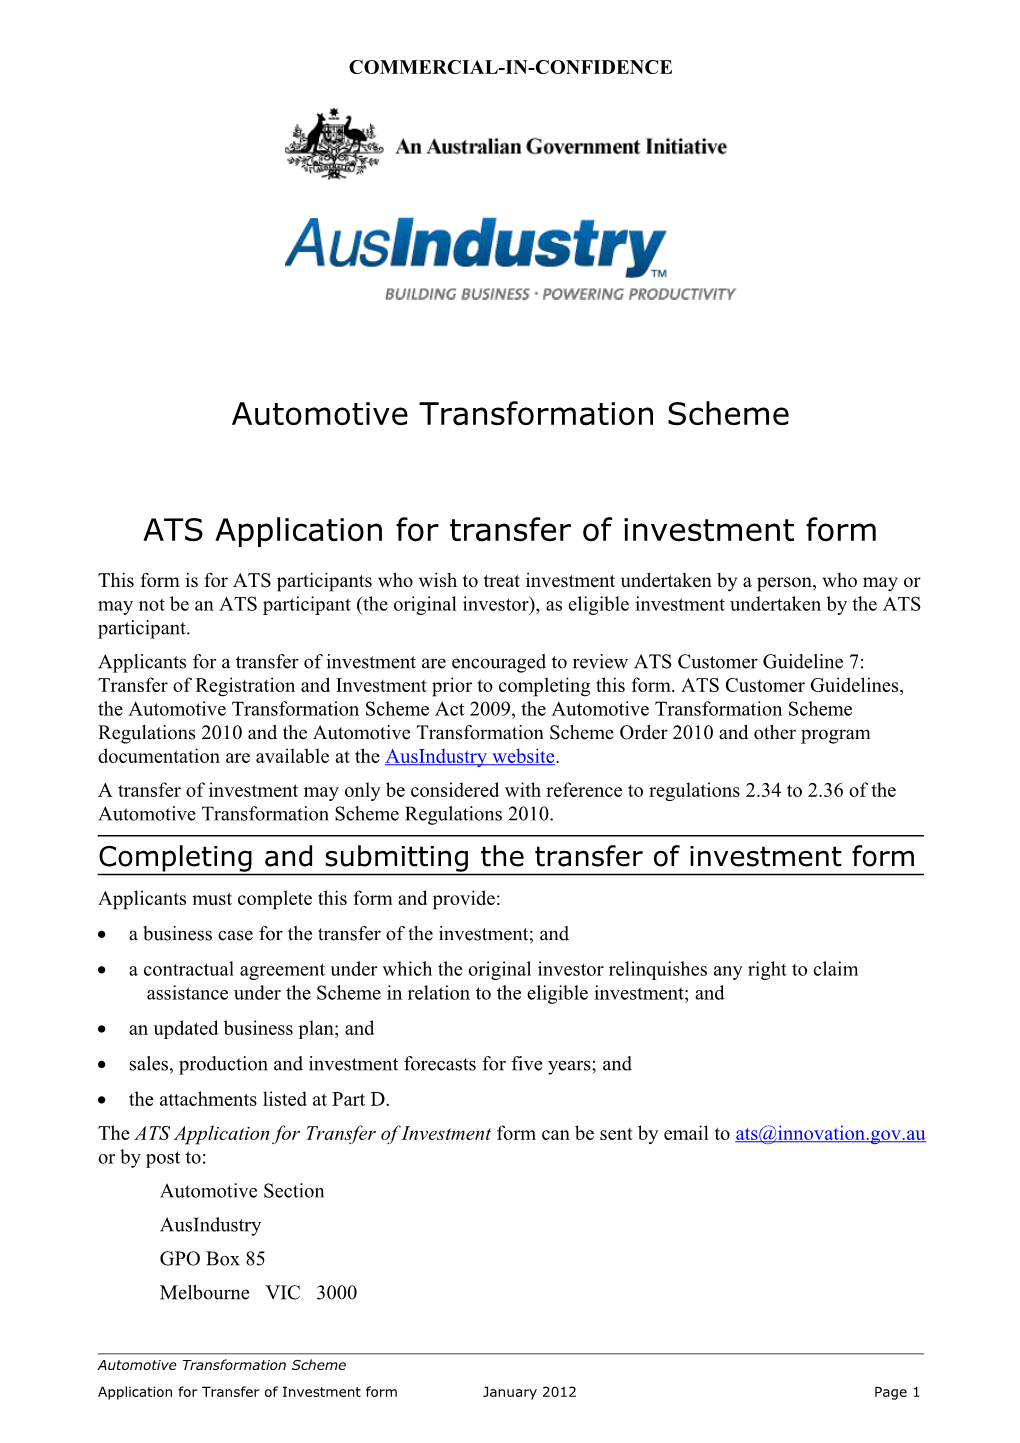 ATS Application for Transfer of Investment Form